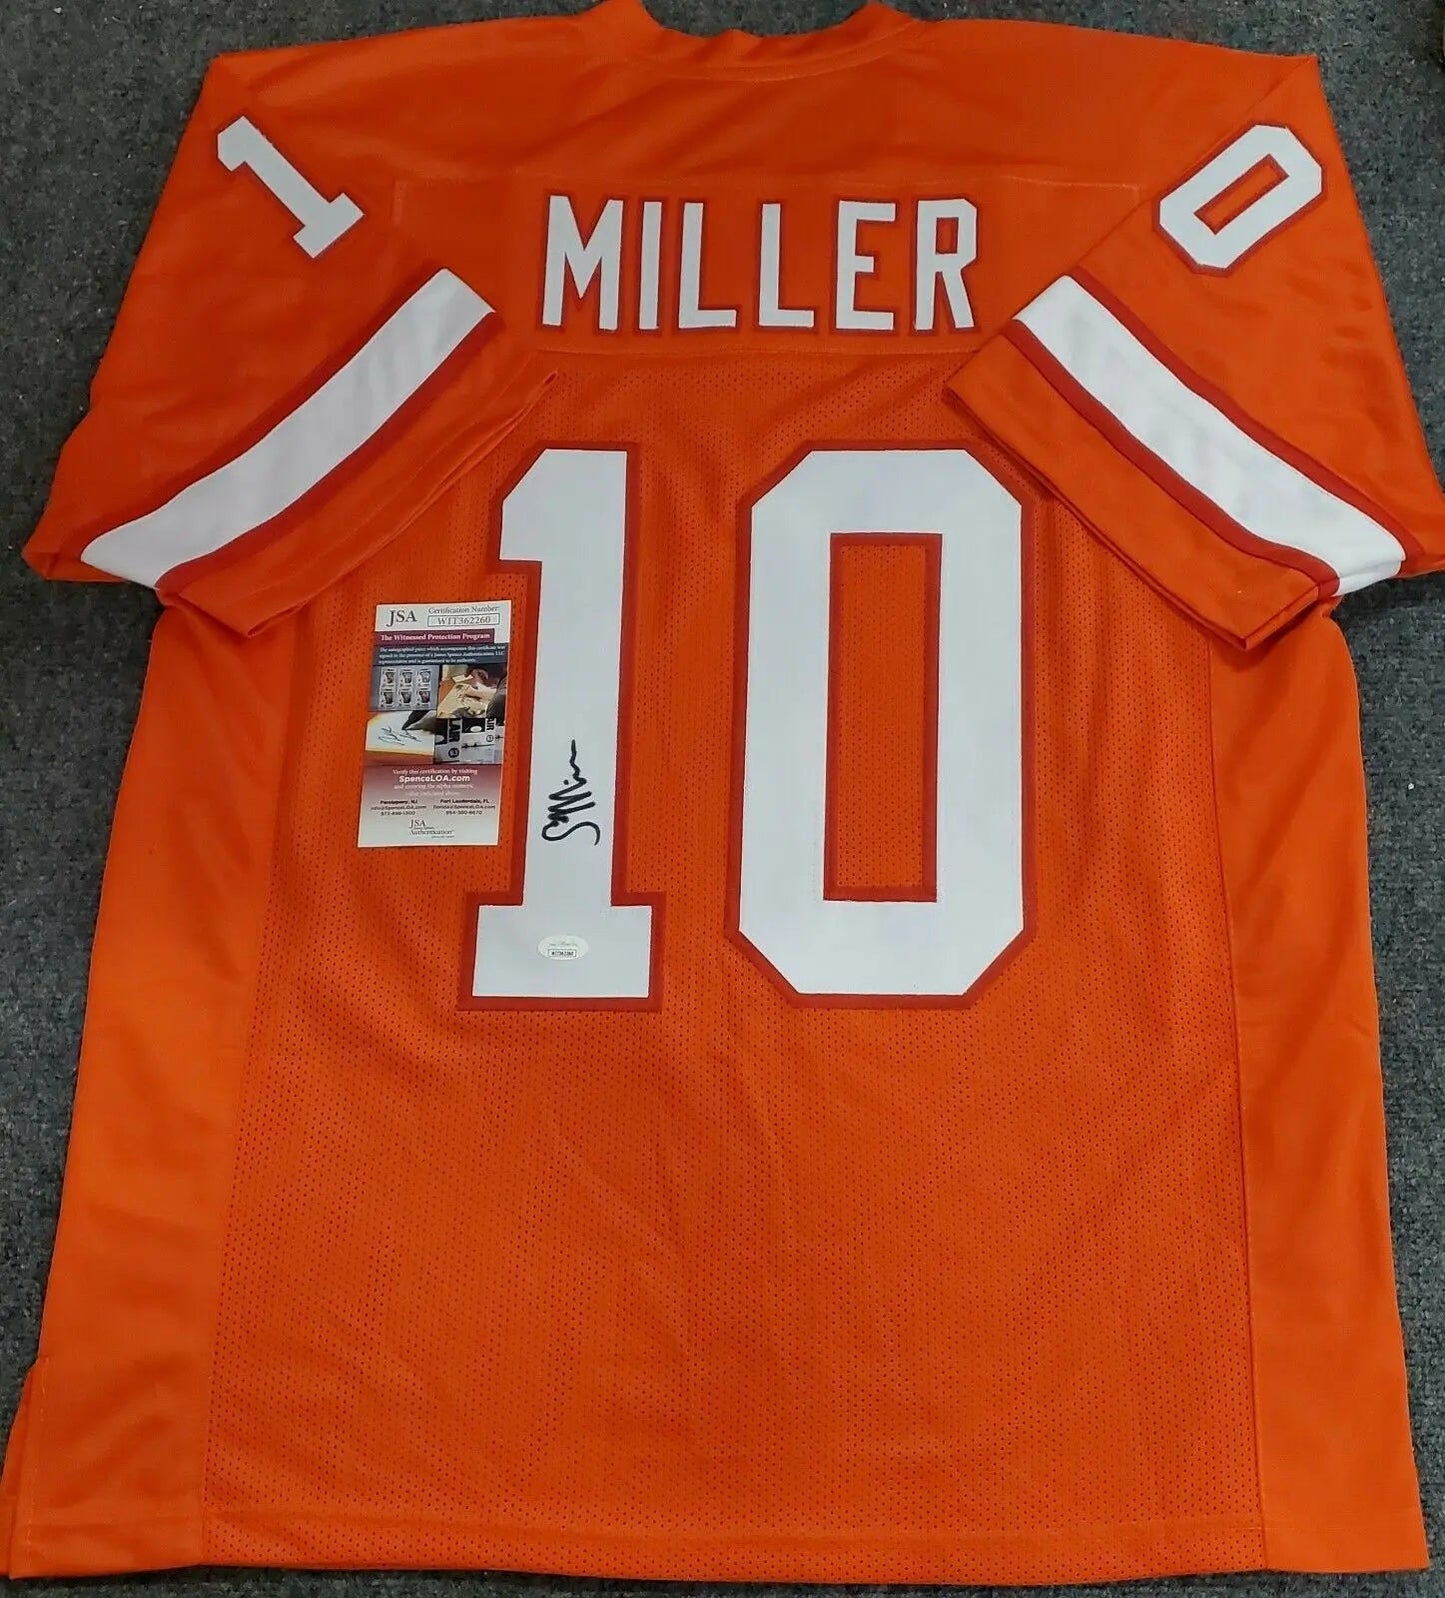 MVP Authentics Tampa Bay Buccaneers Scotty Miller Autographed Signed Jersey Jsa  Coa 112.50 sports jersey framing , jersey framing